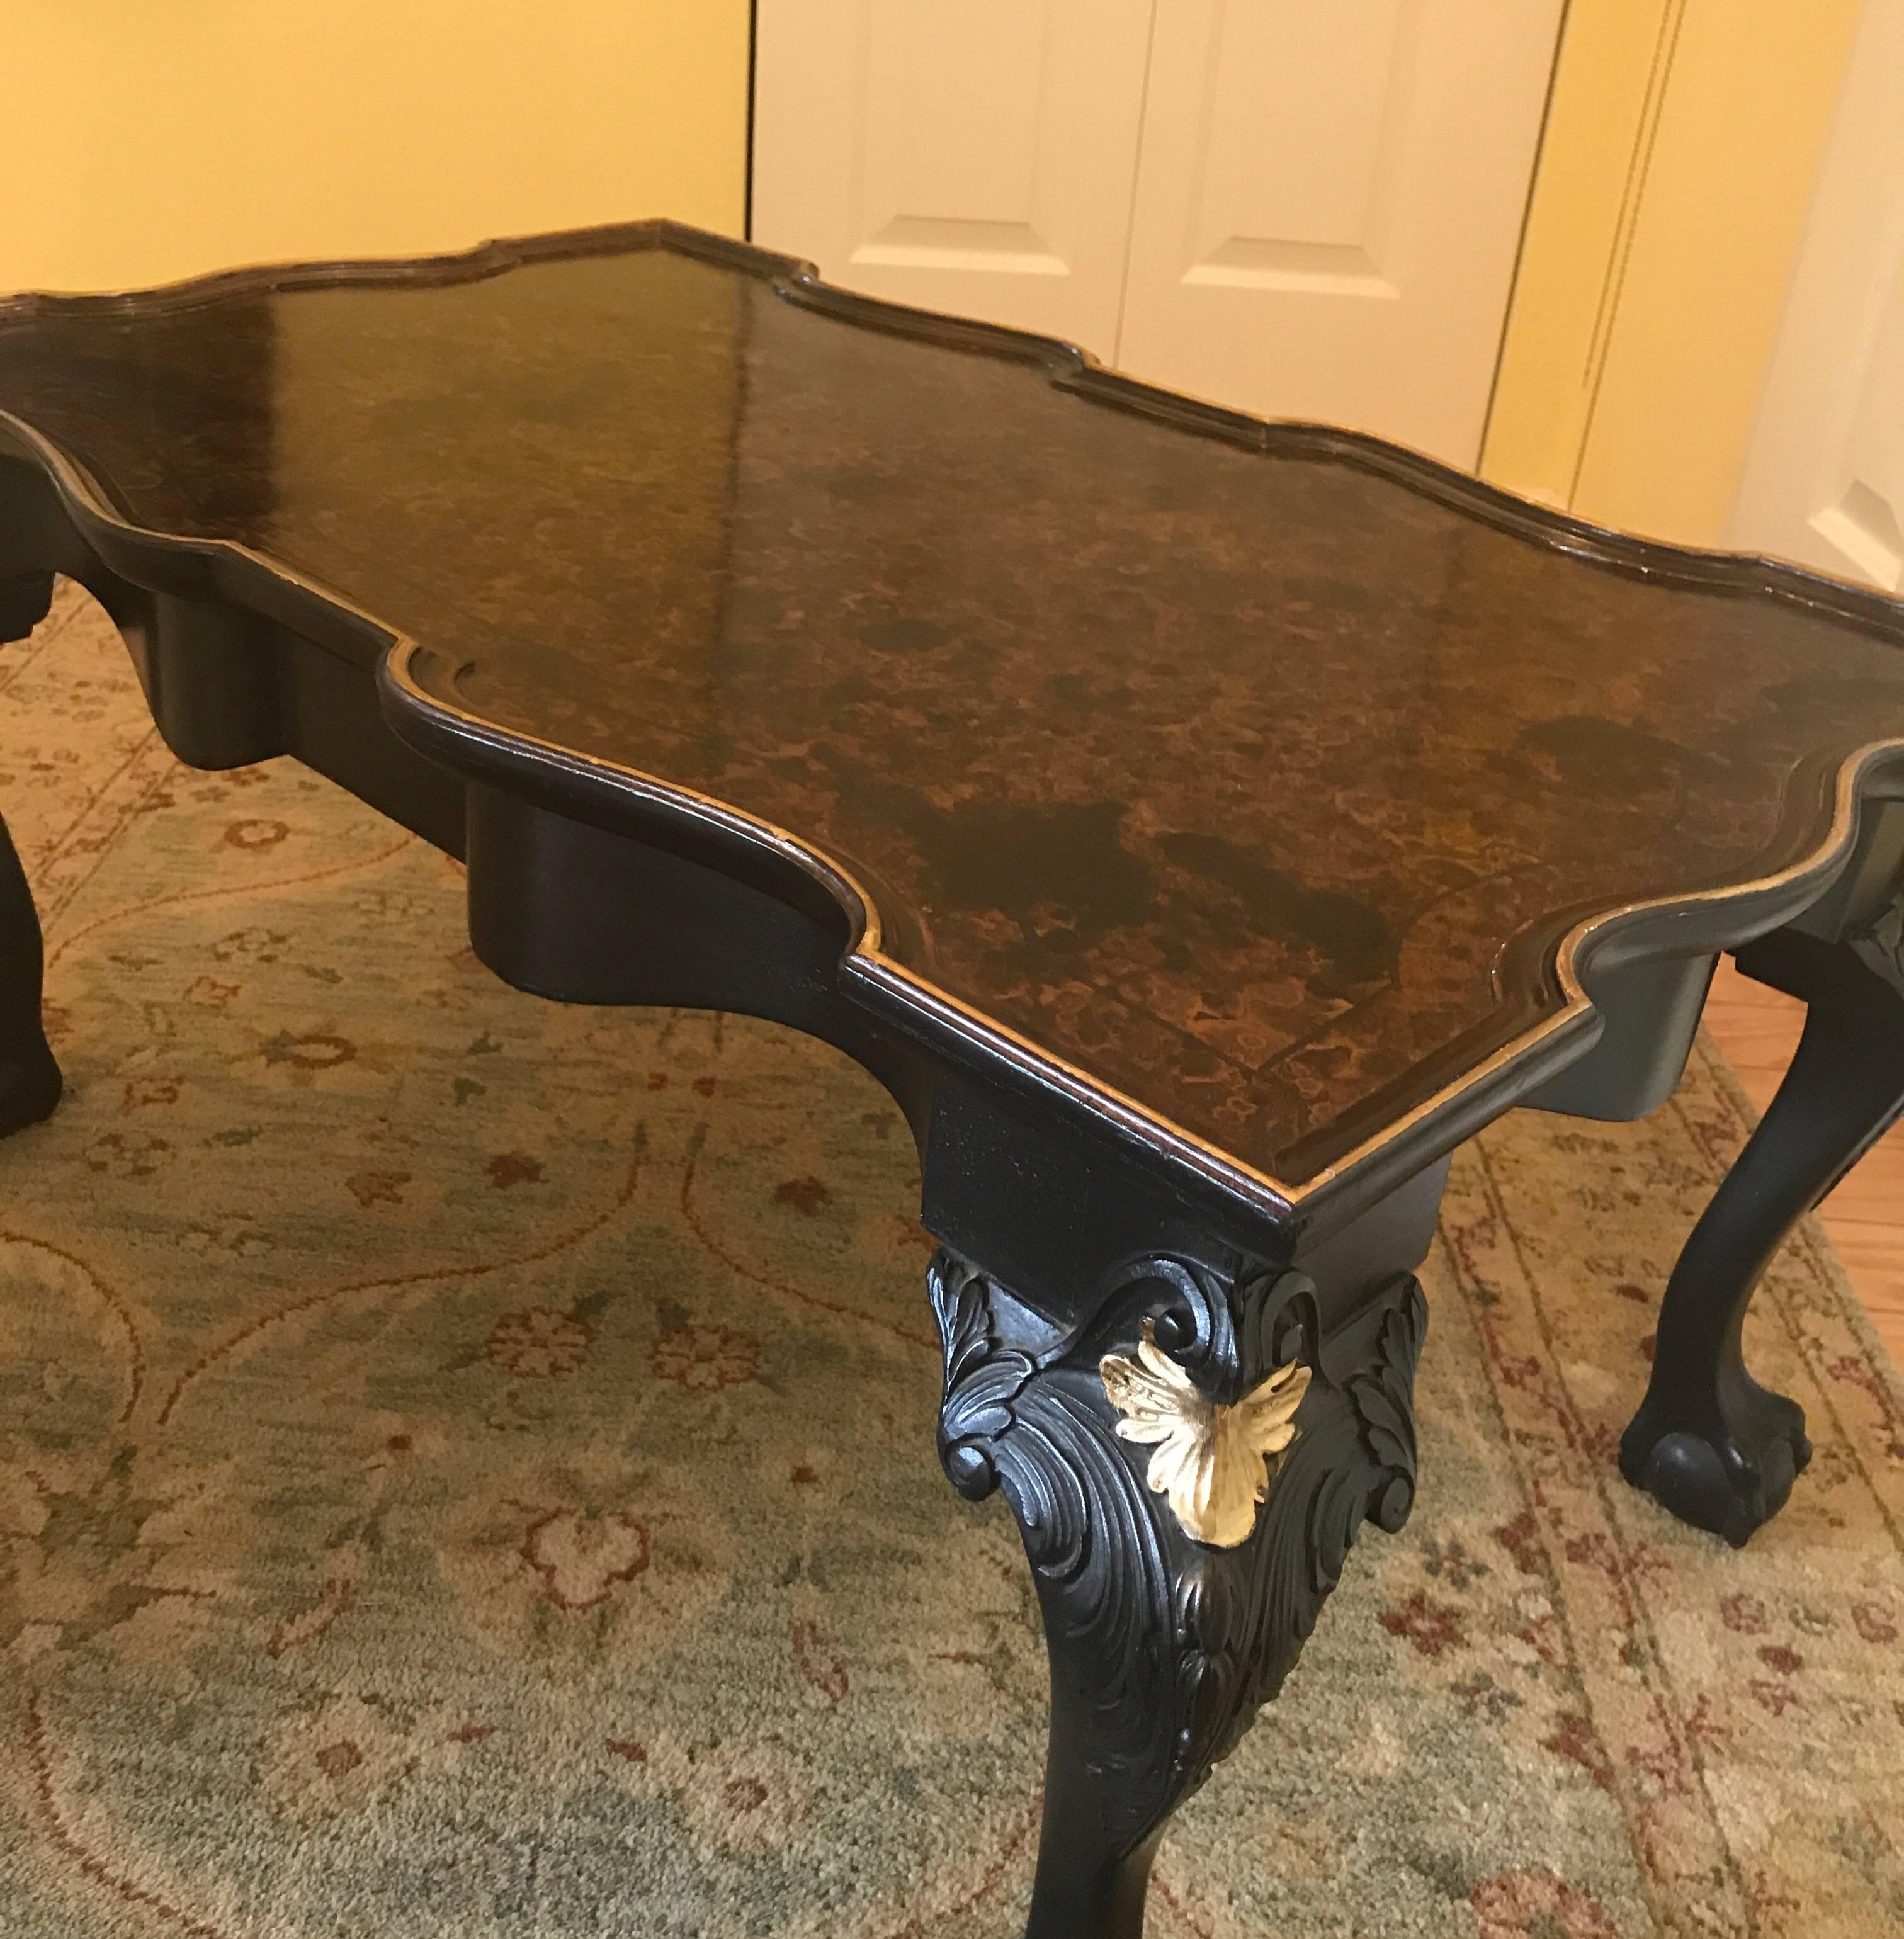 Elegant hand-carved ebonized wood table with a faux tortoise shell top. The shapely scalloped shape with curved and carved legs with gilt shell in the top. The tortoise surface with gilt outline over nicely carved cabriole legs.